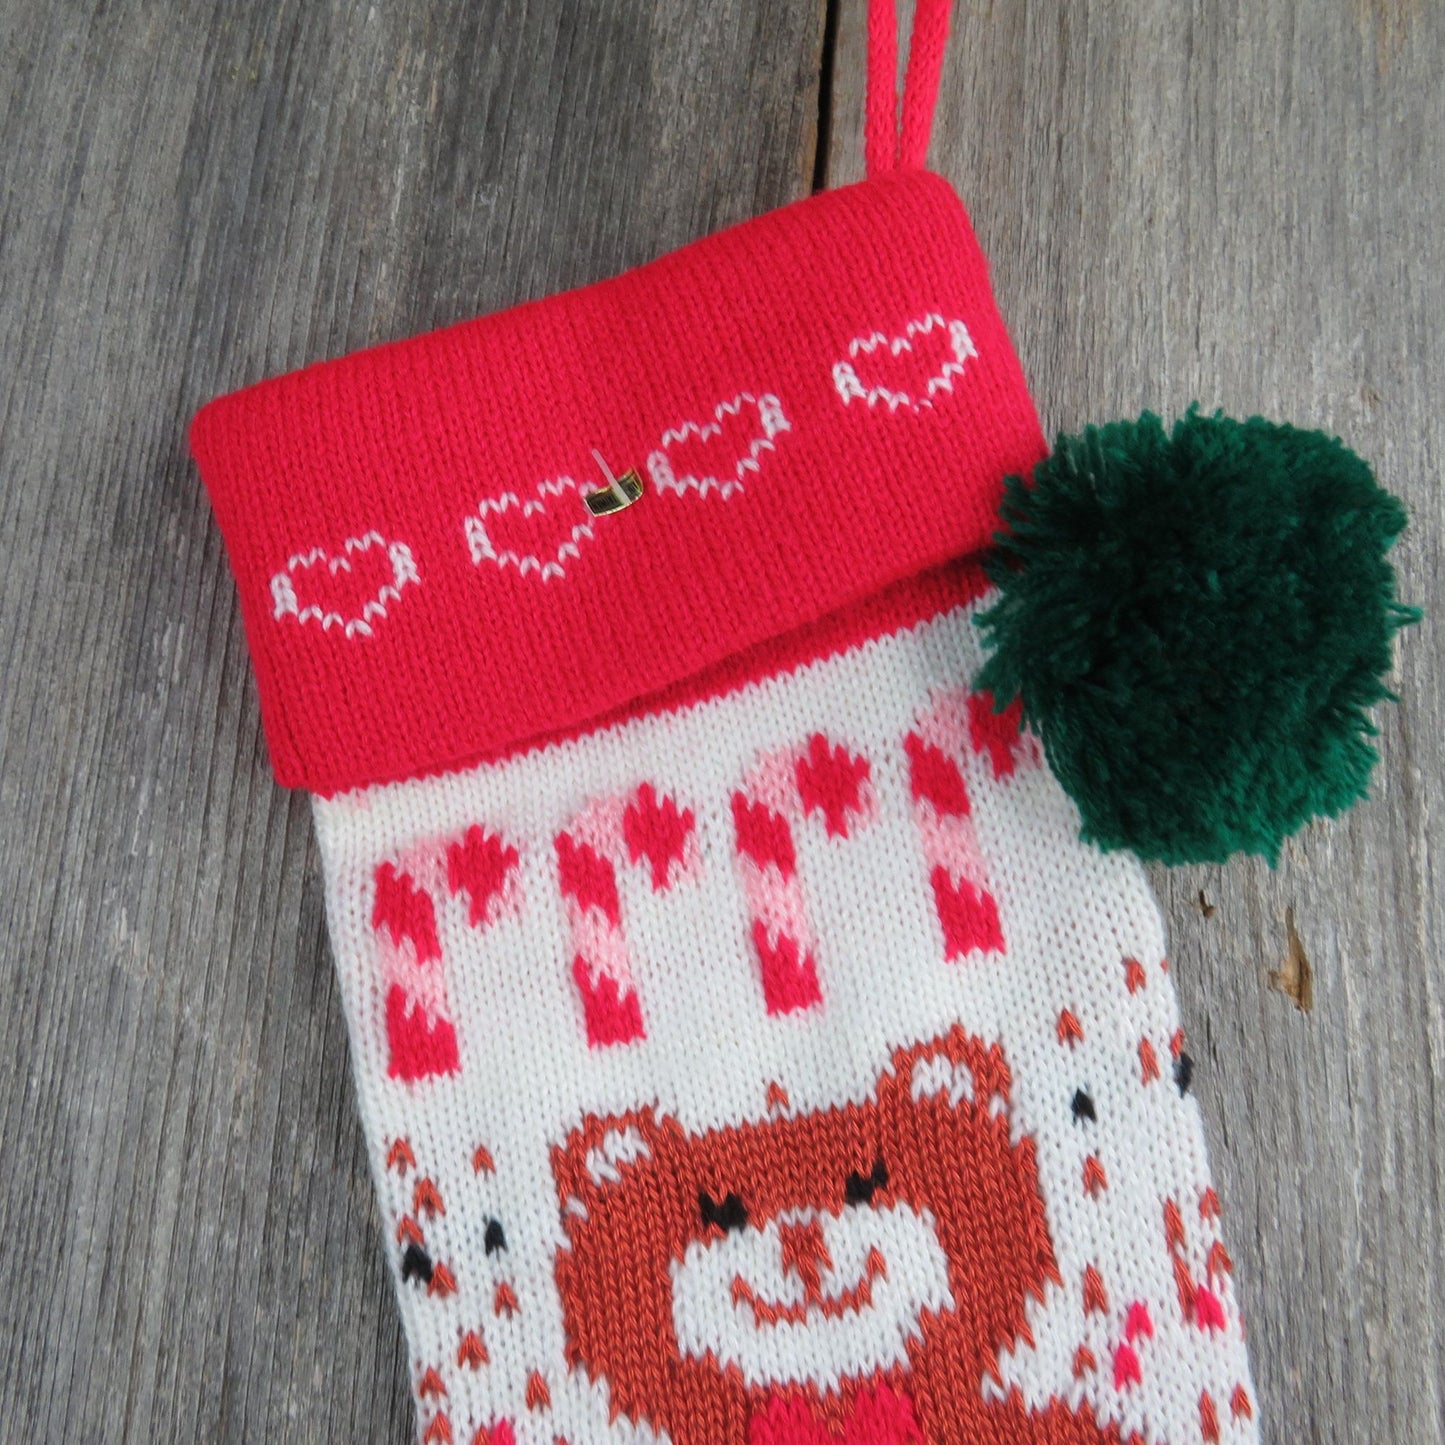 Vintage Teddy Bear Candy Cane Knit Christmas Stocking Red Green 1980s st13